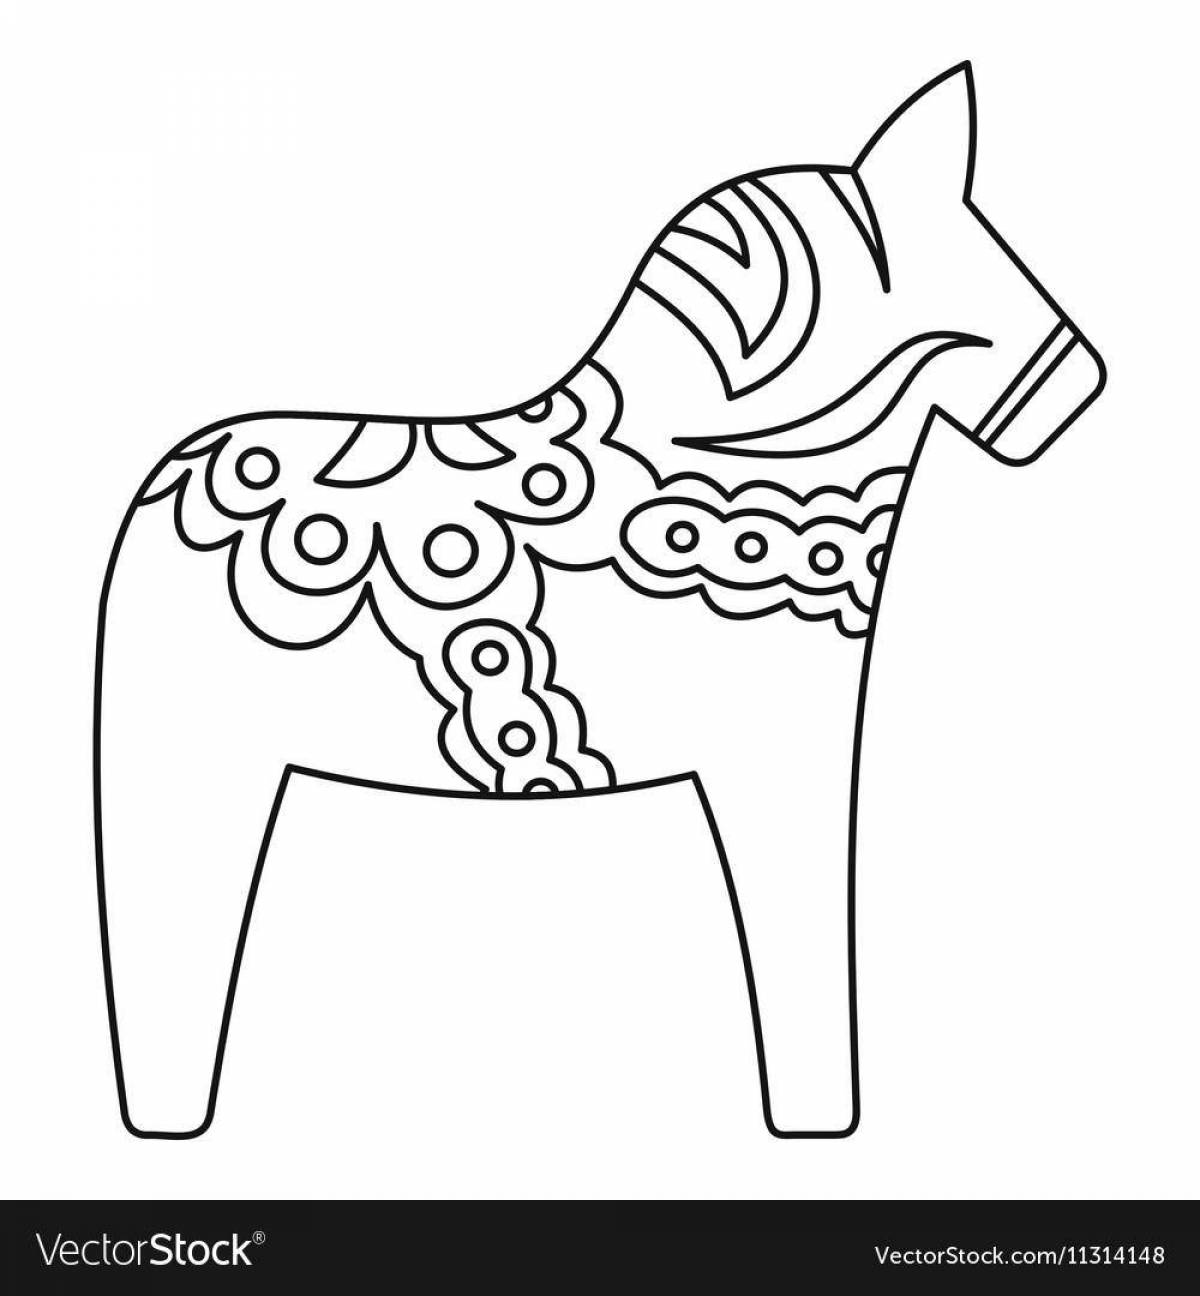 Spectacular Dymkovo horse coloring book for children